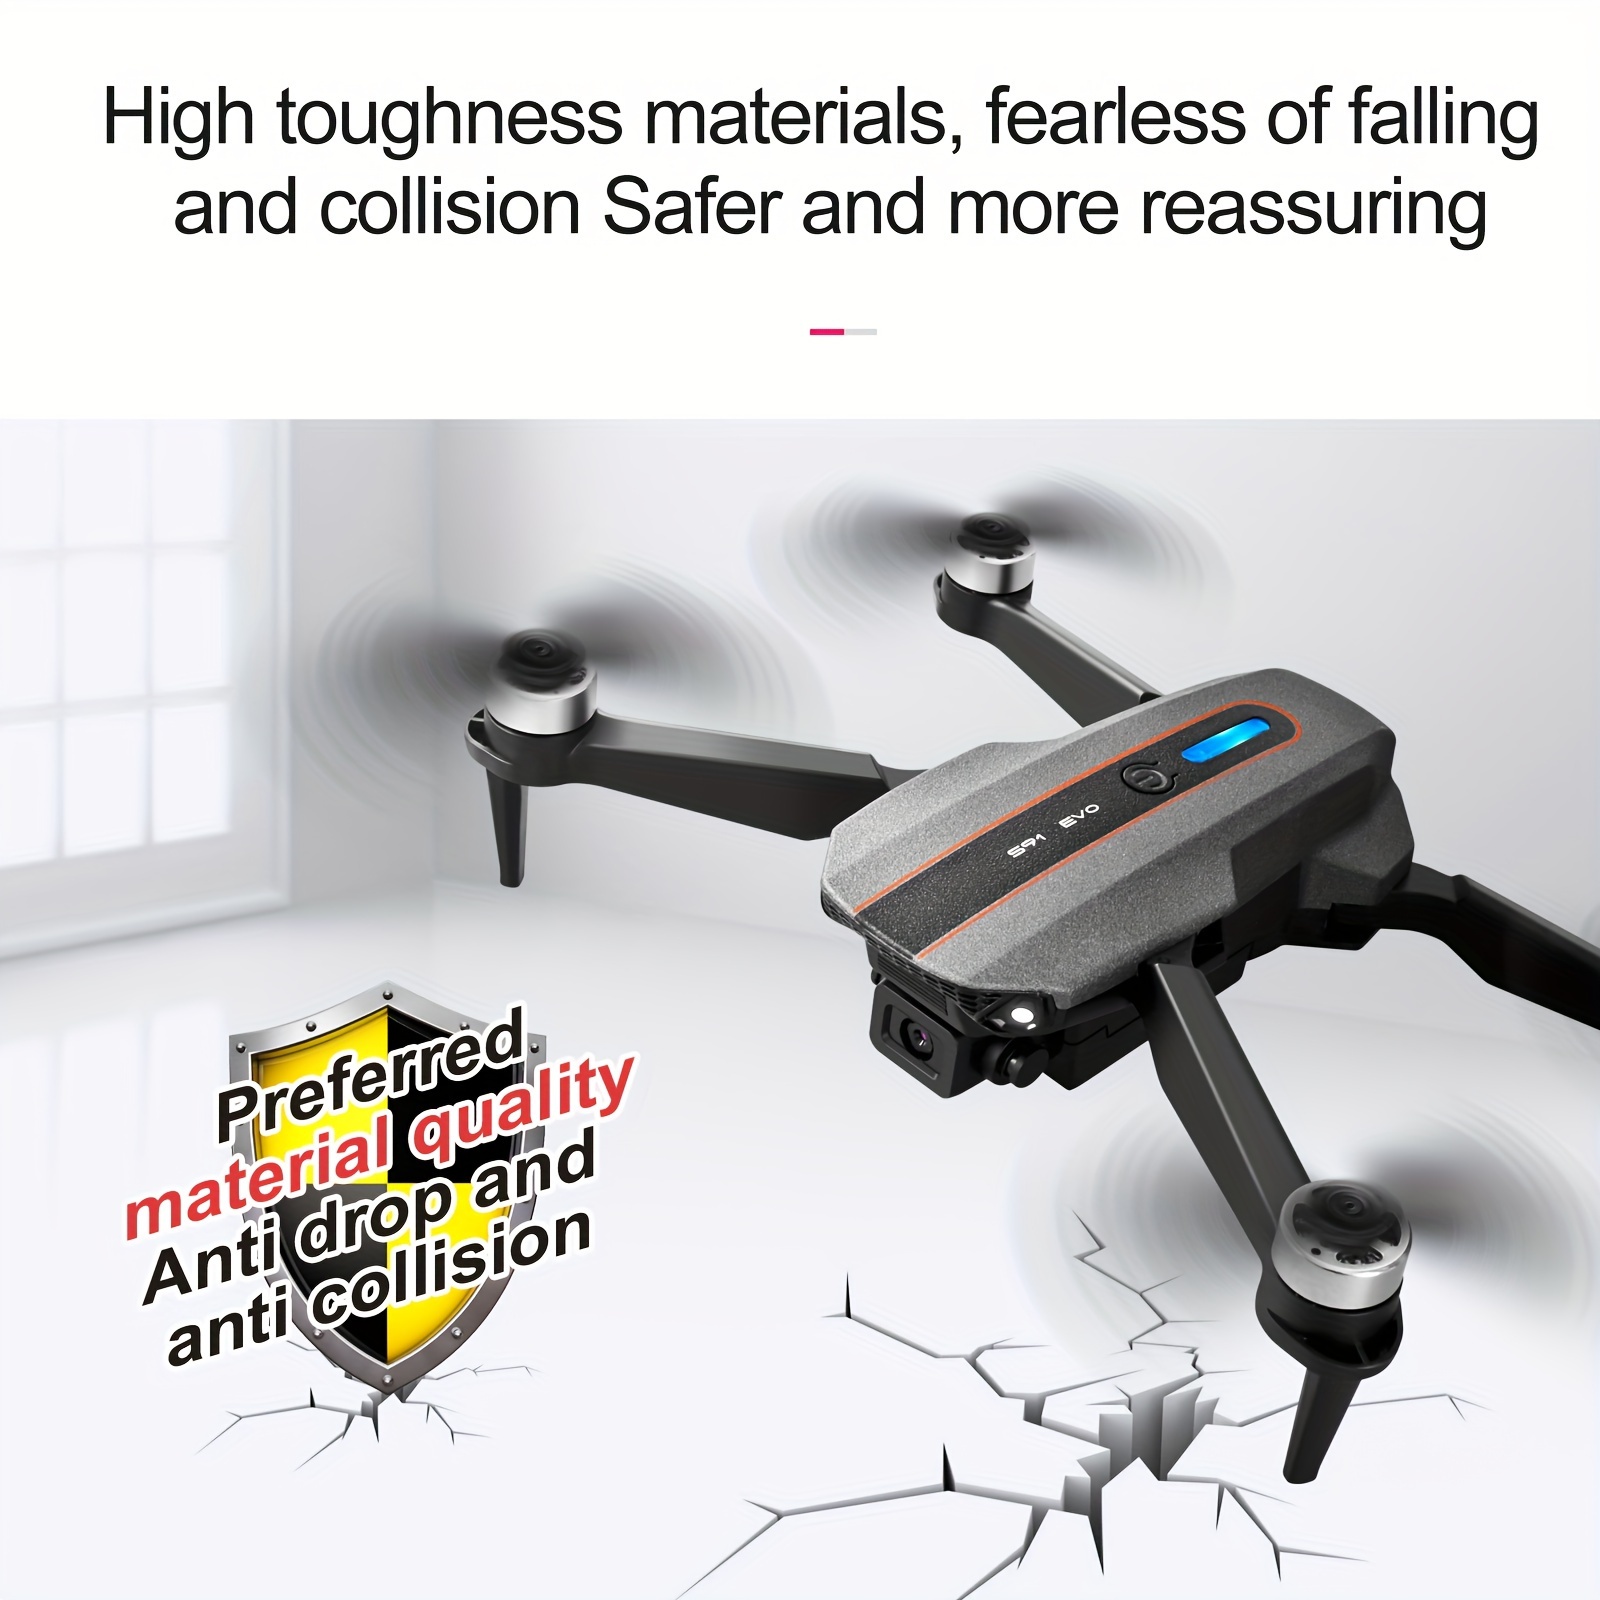 s91 remote remote control drone with hd dual camera adjustable headless mode track flying one key surround smart follow brushless motor drone self with optical flow positioning function details 13